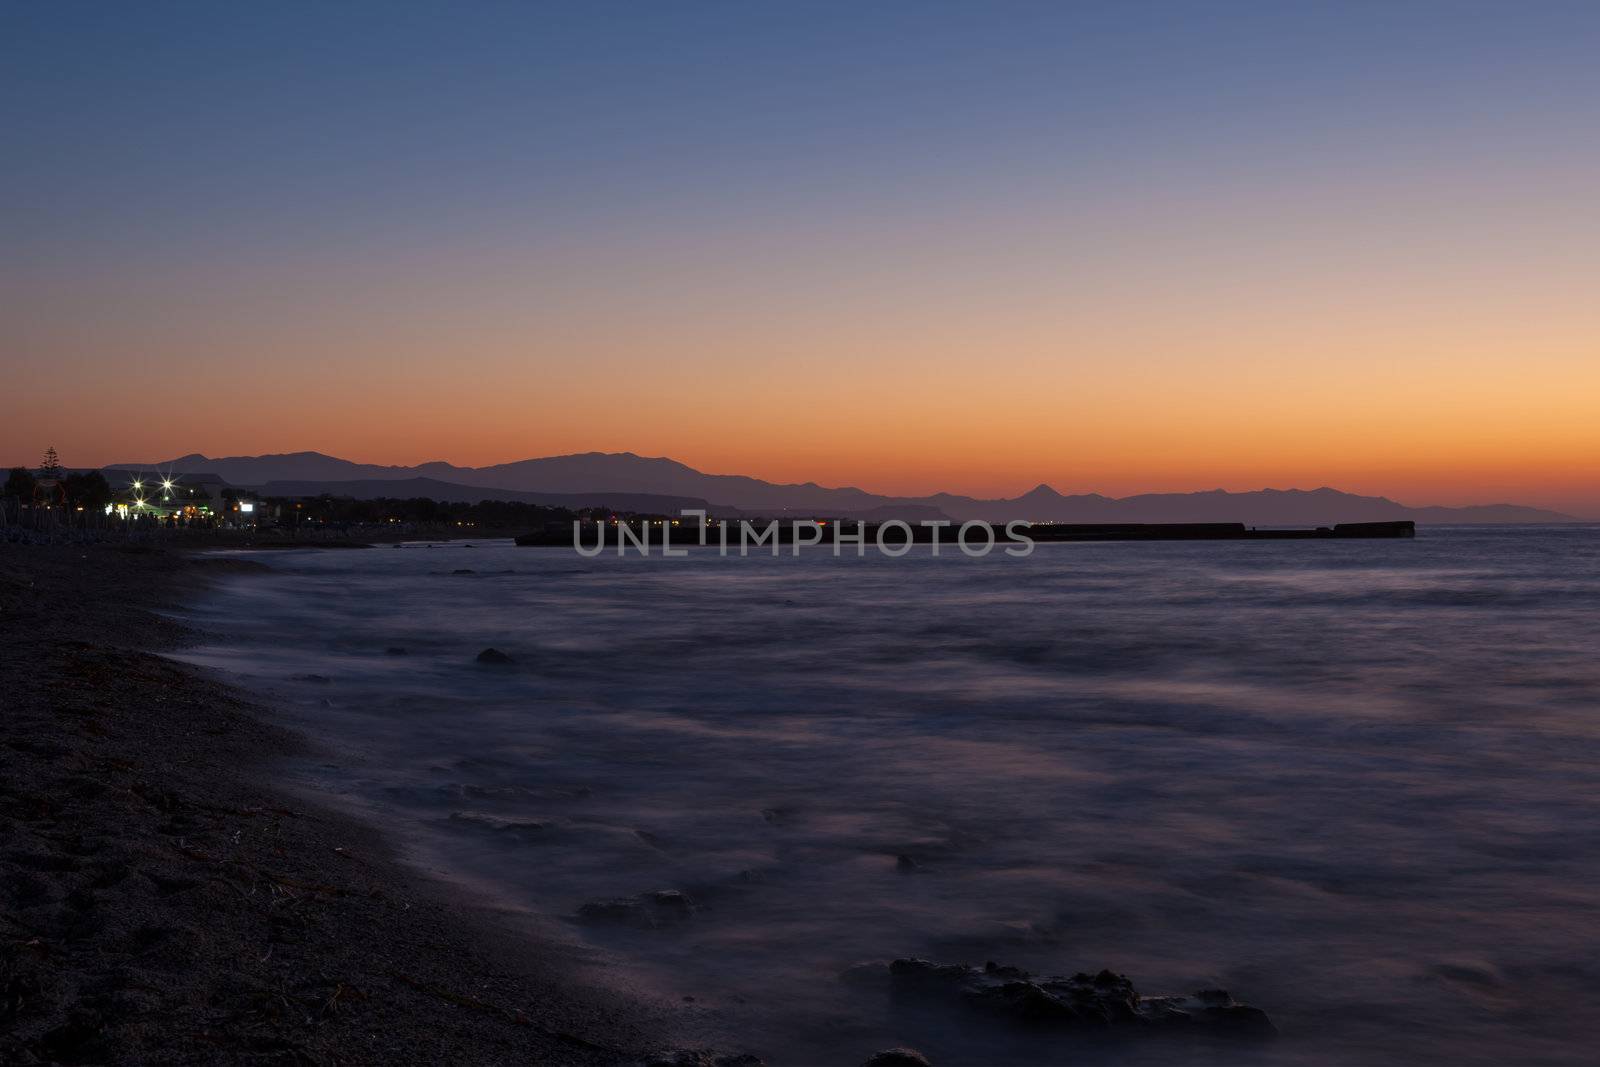 Sunset on the Mediterranean sea by DimasEKB